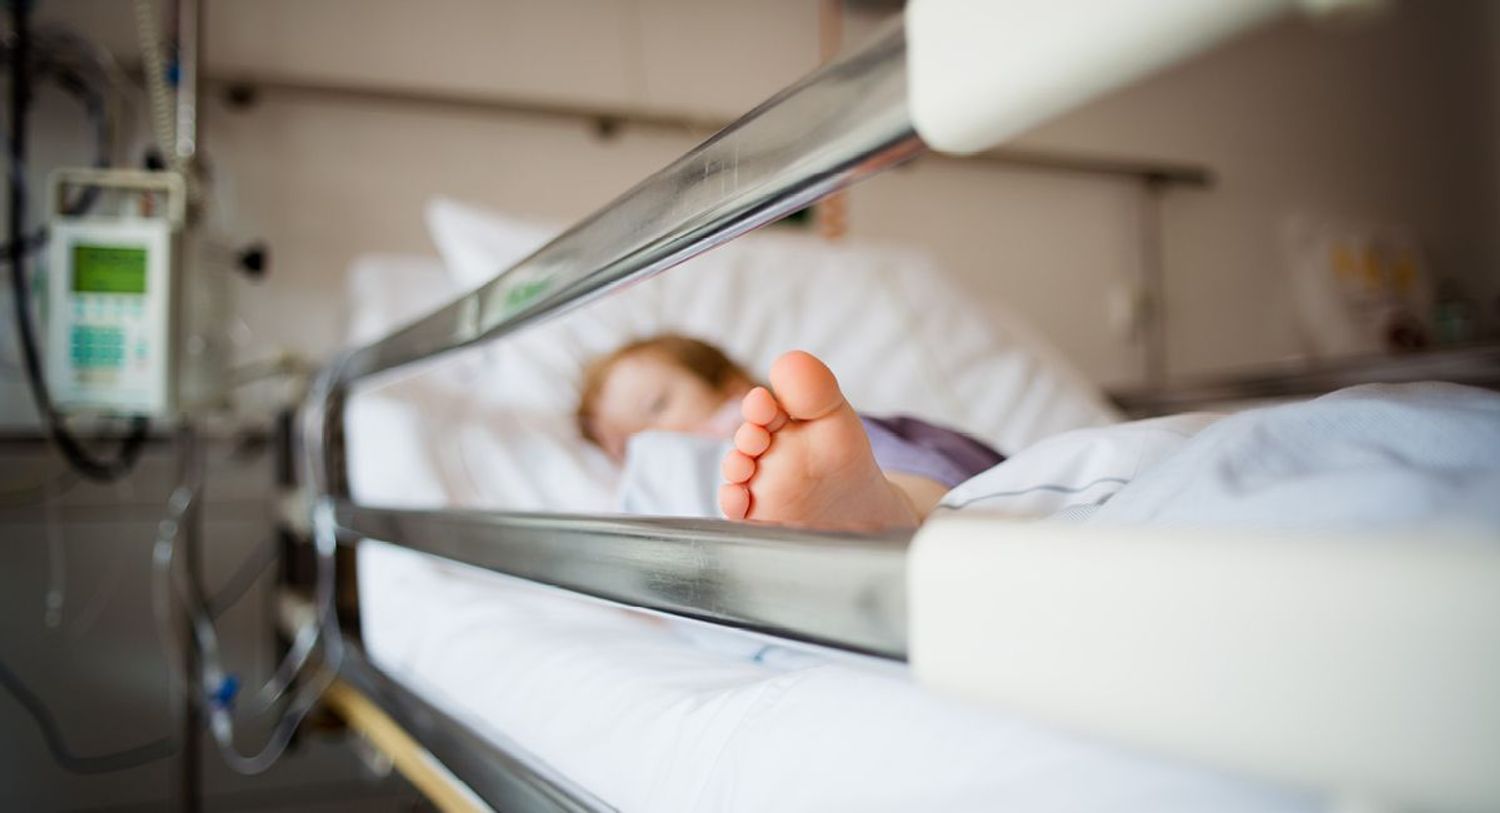 A child lying in a hospital bed out of focus with sheet over them